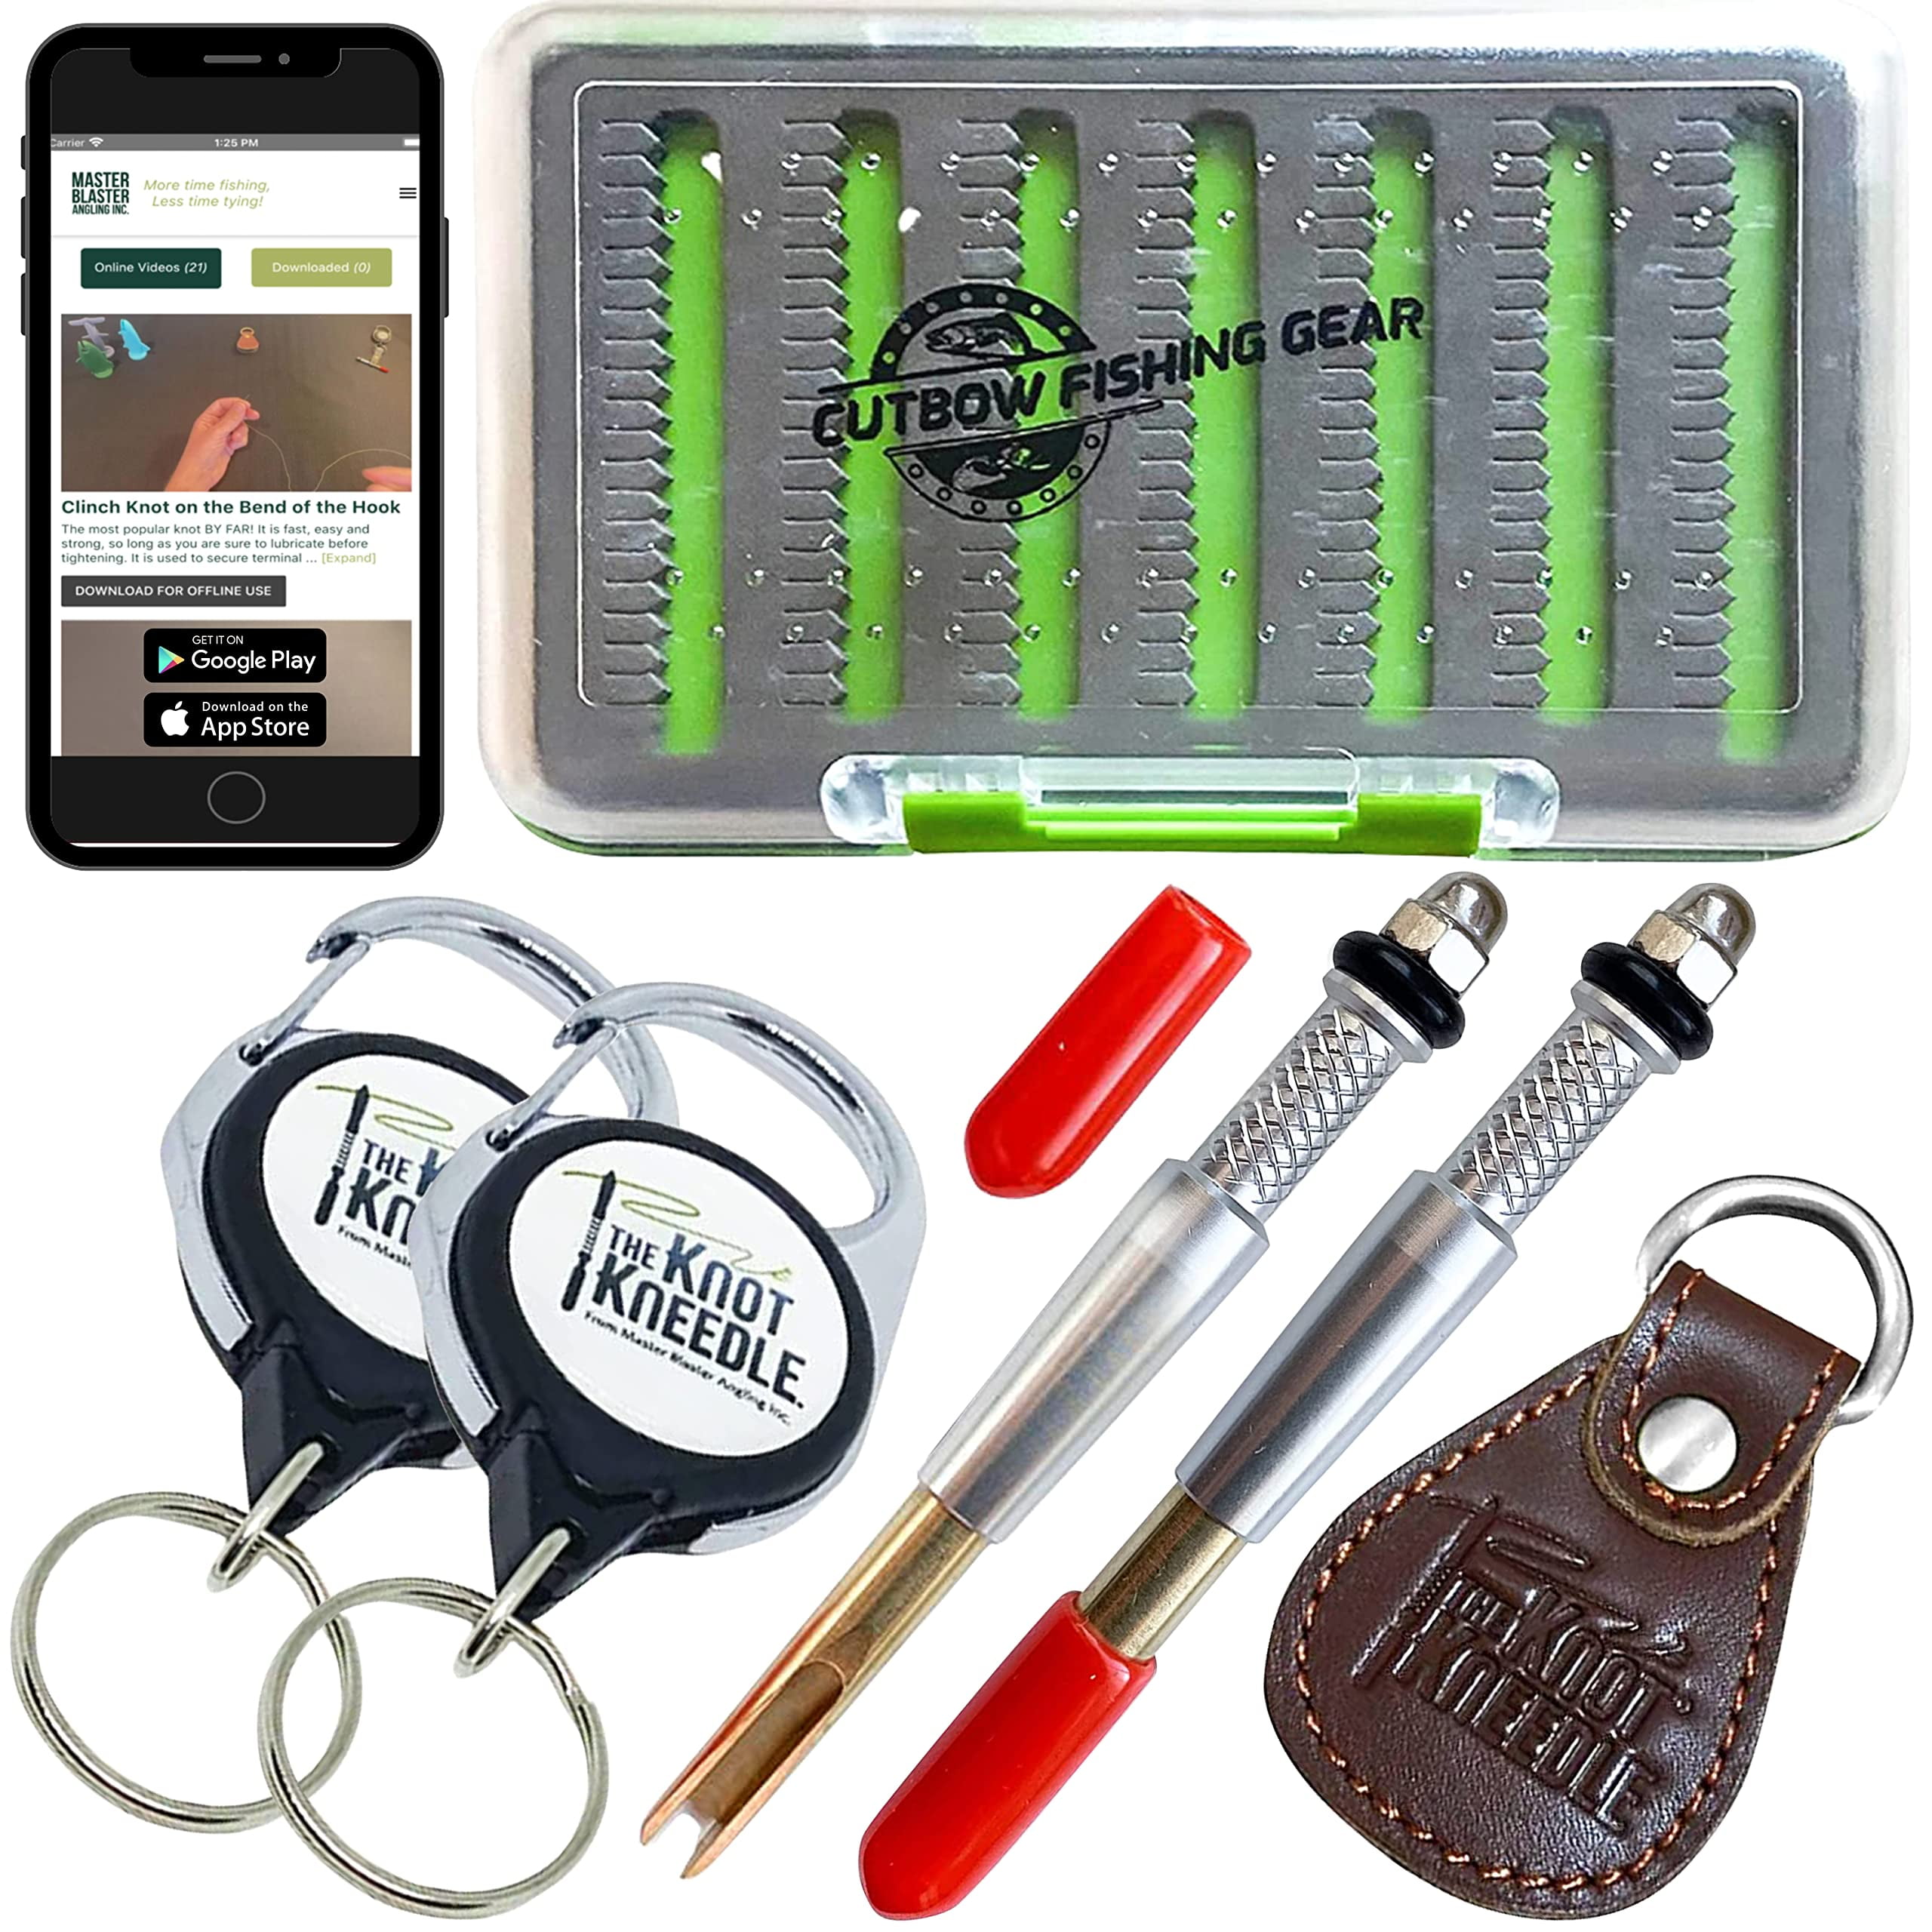 KNOT KNEEDLE Catch Lunker Bundle 2 Epic, Fishing Accessories of 2 Zingers,  Fly Straightener, Fly Fishing Box, Fishing Knot Tying Tool Tie 25+ Basic  and Advanced Knots - 5-Piece Bundle 